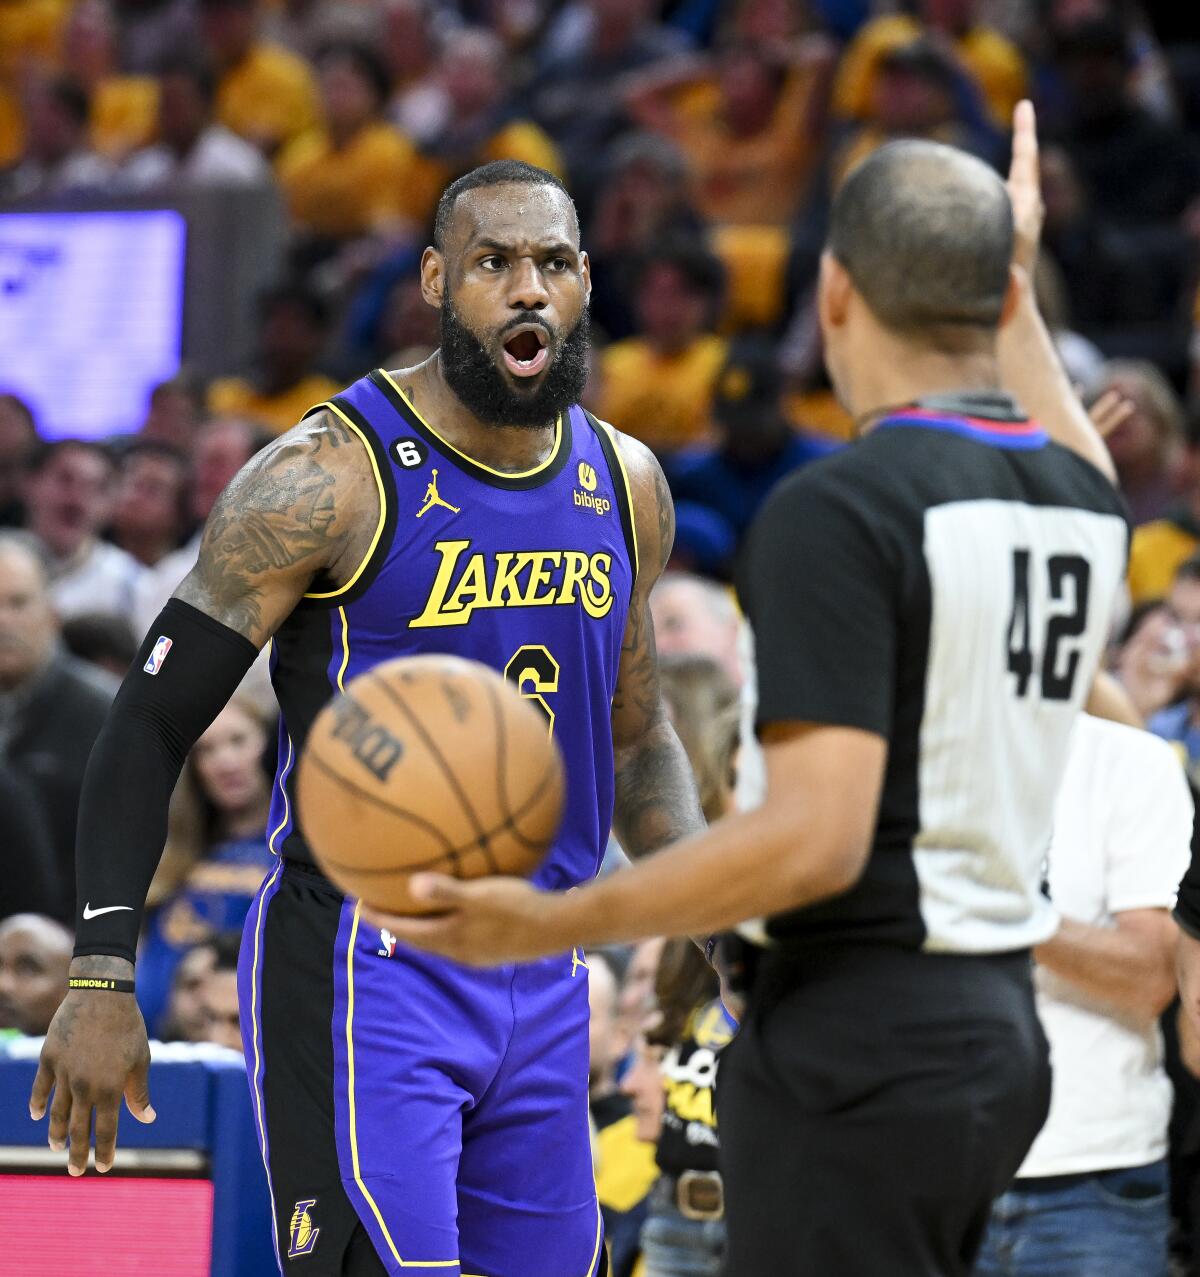 Lakers forward LeBron James reacts after a foul is called on him by referee Eric Lewis.